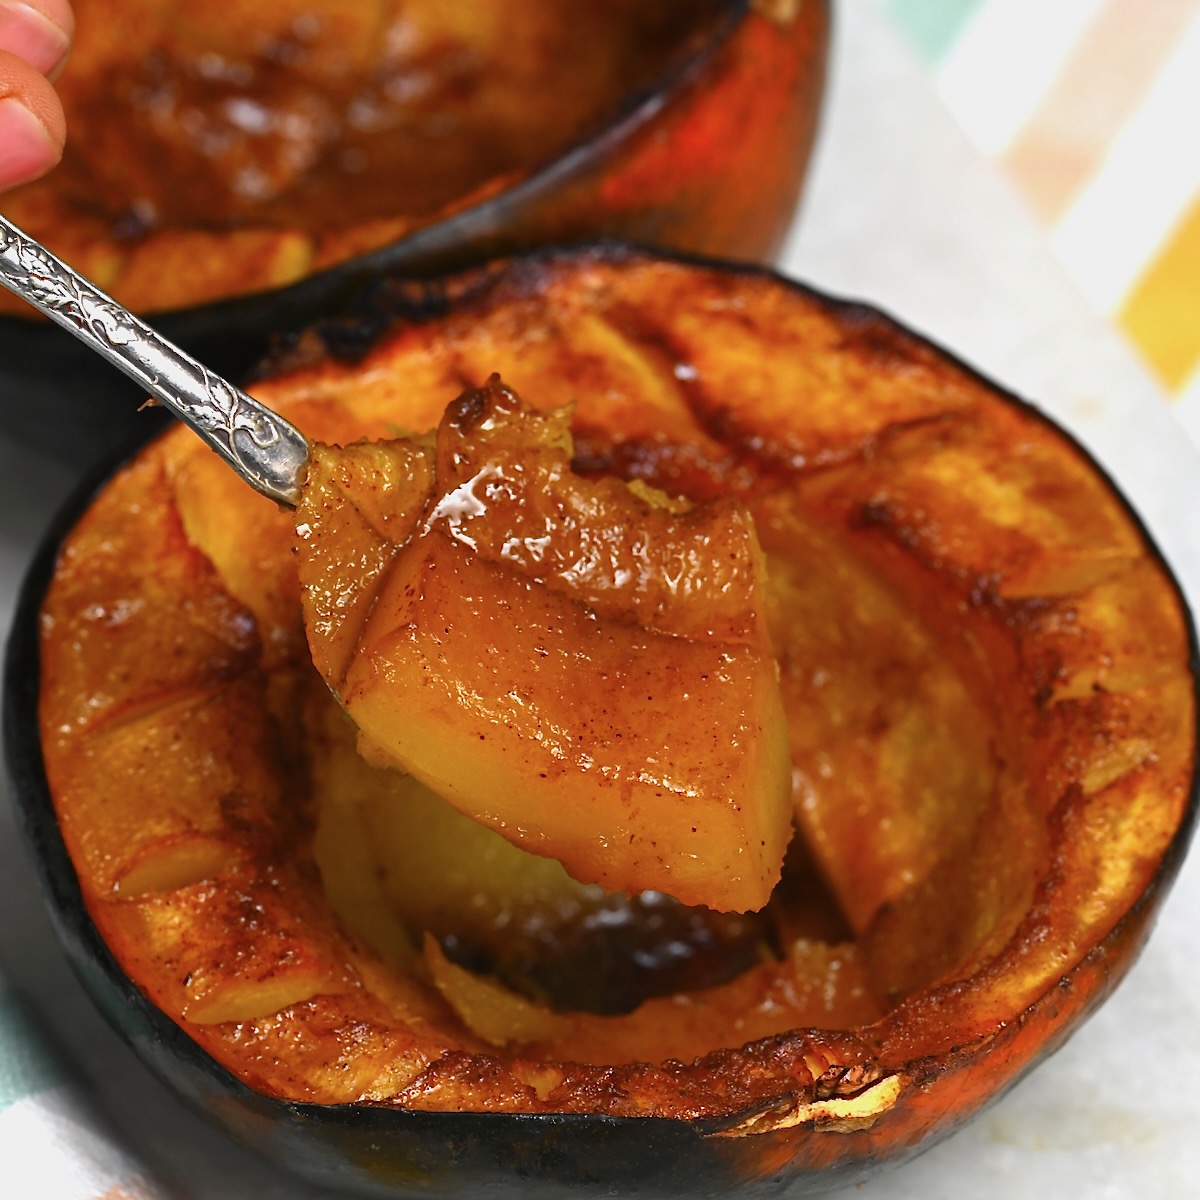 A spoonful of roasted acorn squash